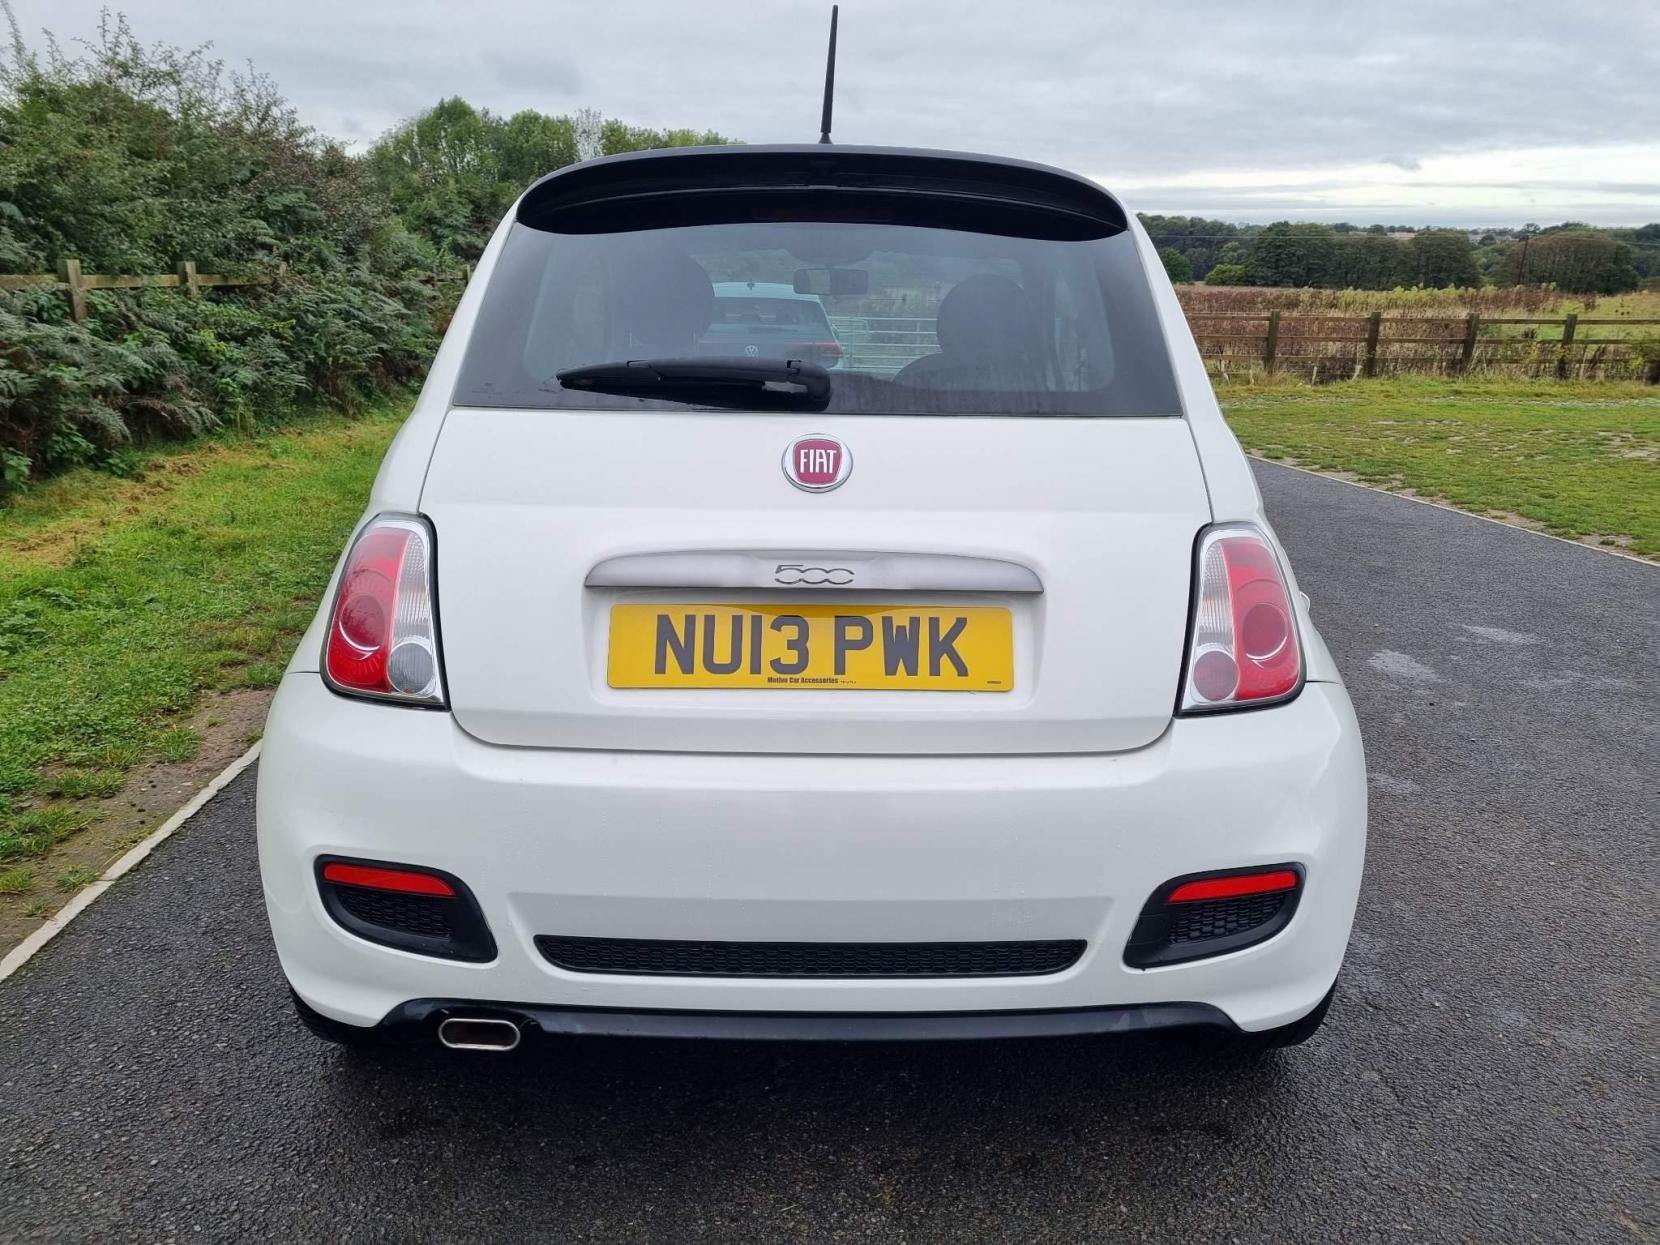 Fiat 500 1.2 S Euro 5 (s/s) 3dr